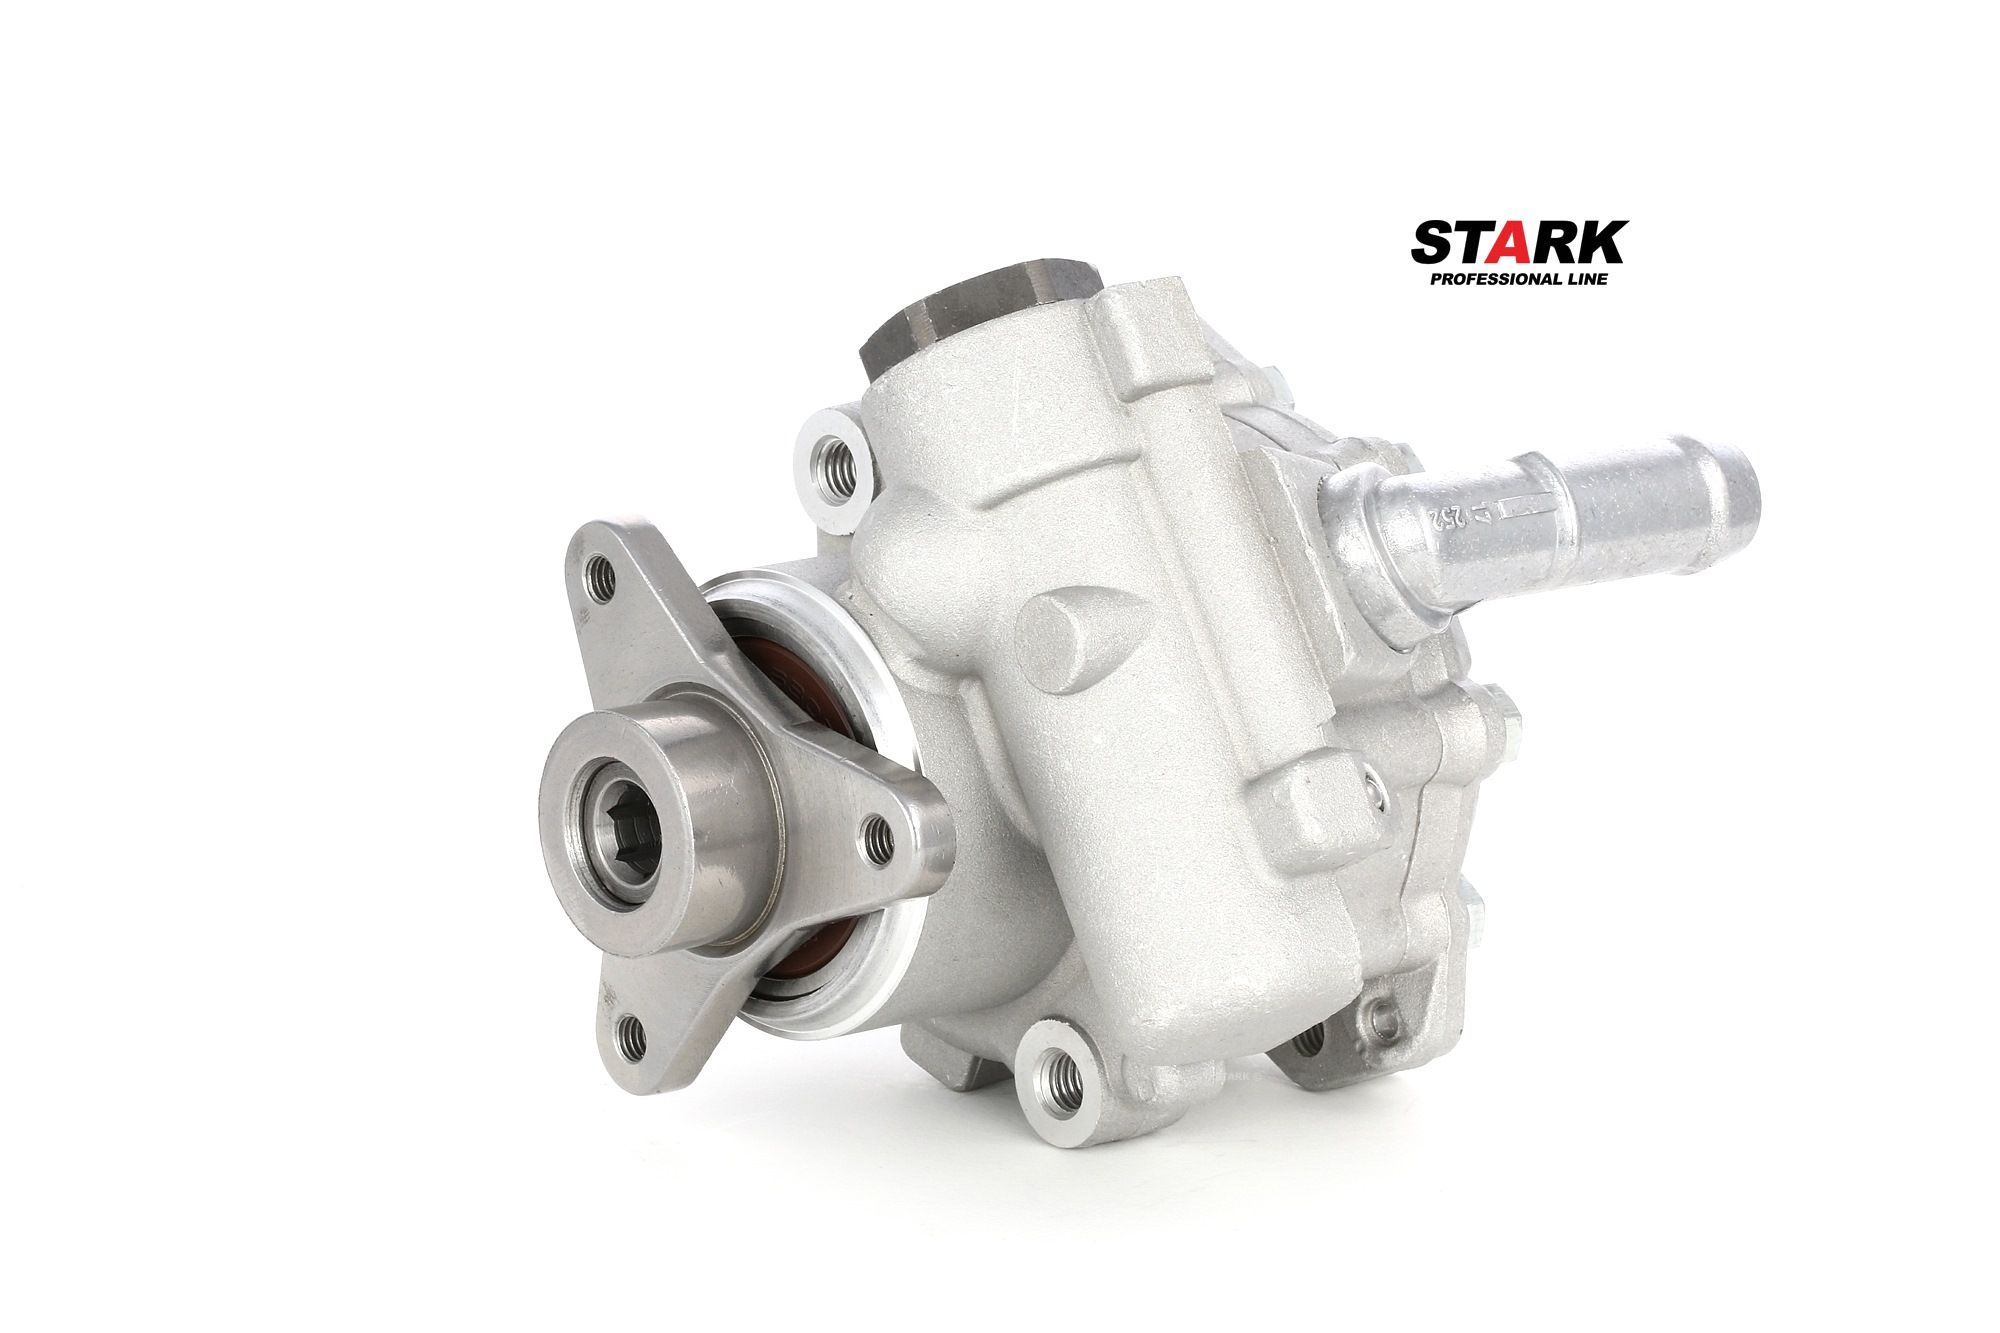 STARK SKHP-0540033 Power steering pump Hydraulic, 120 bar, M16x1.5, Star Shape, for left-hand/right-hand drive vehicles